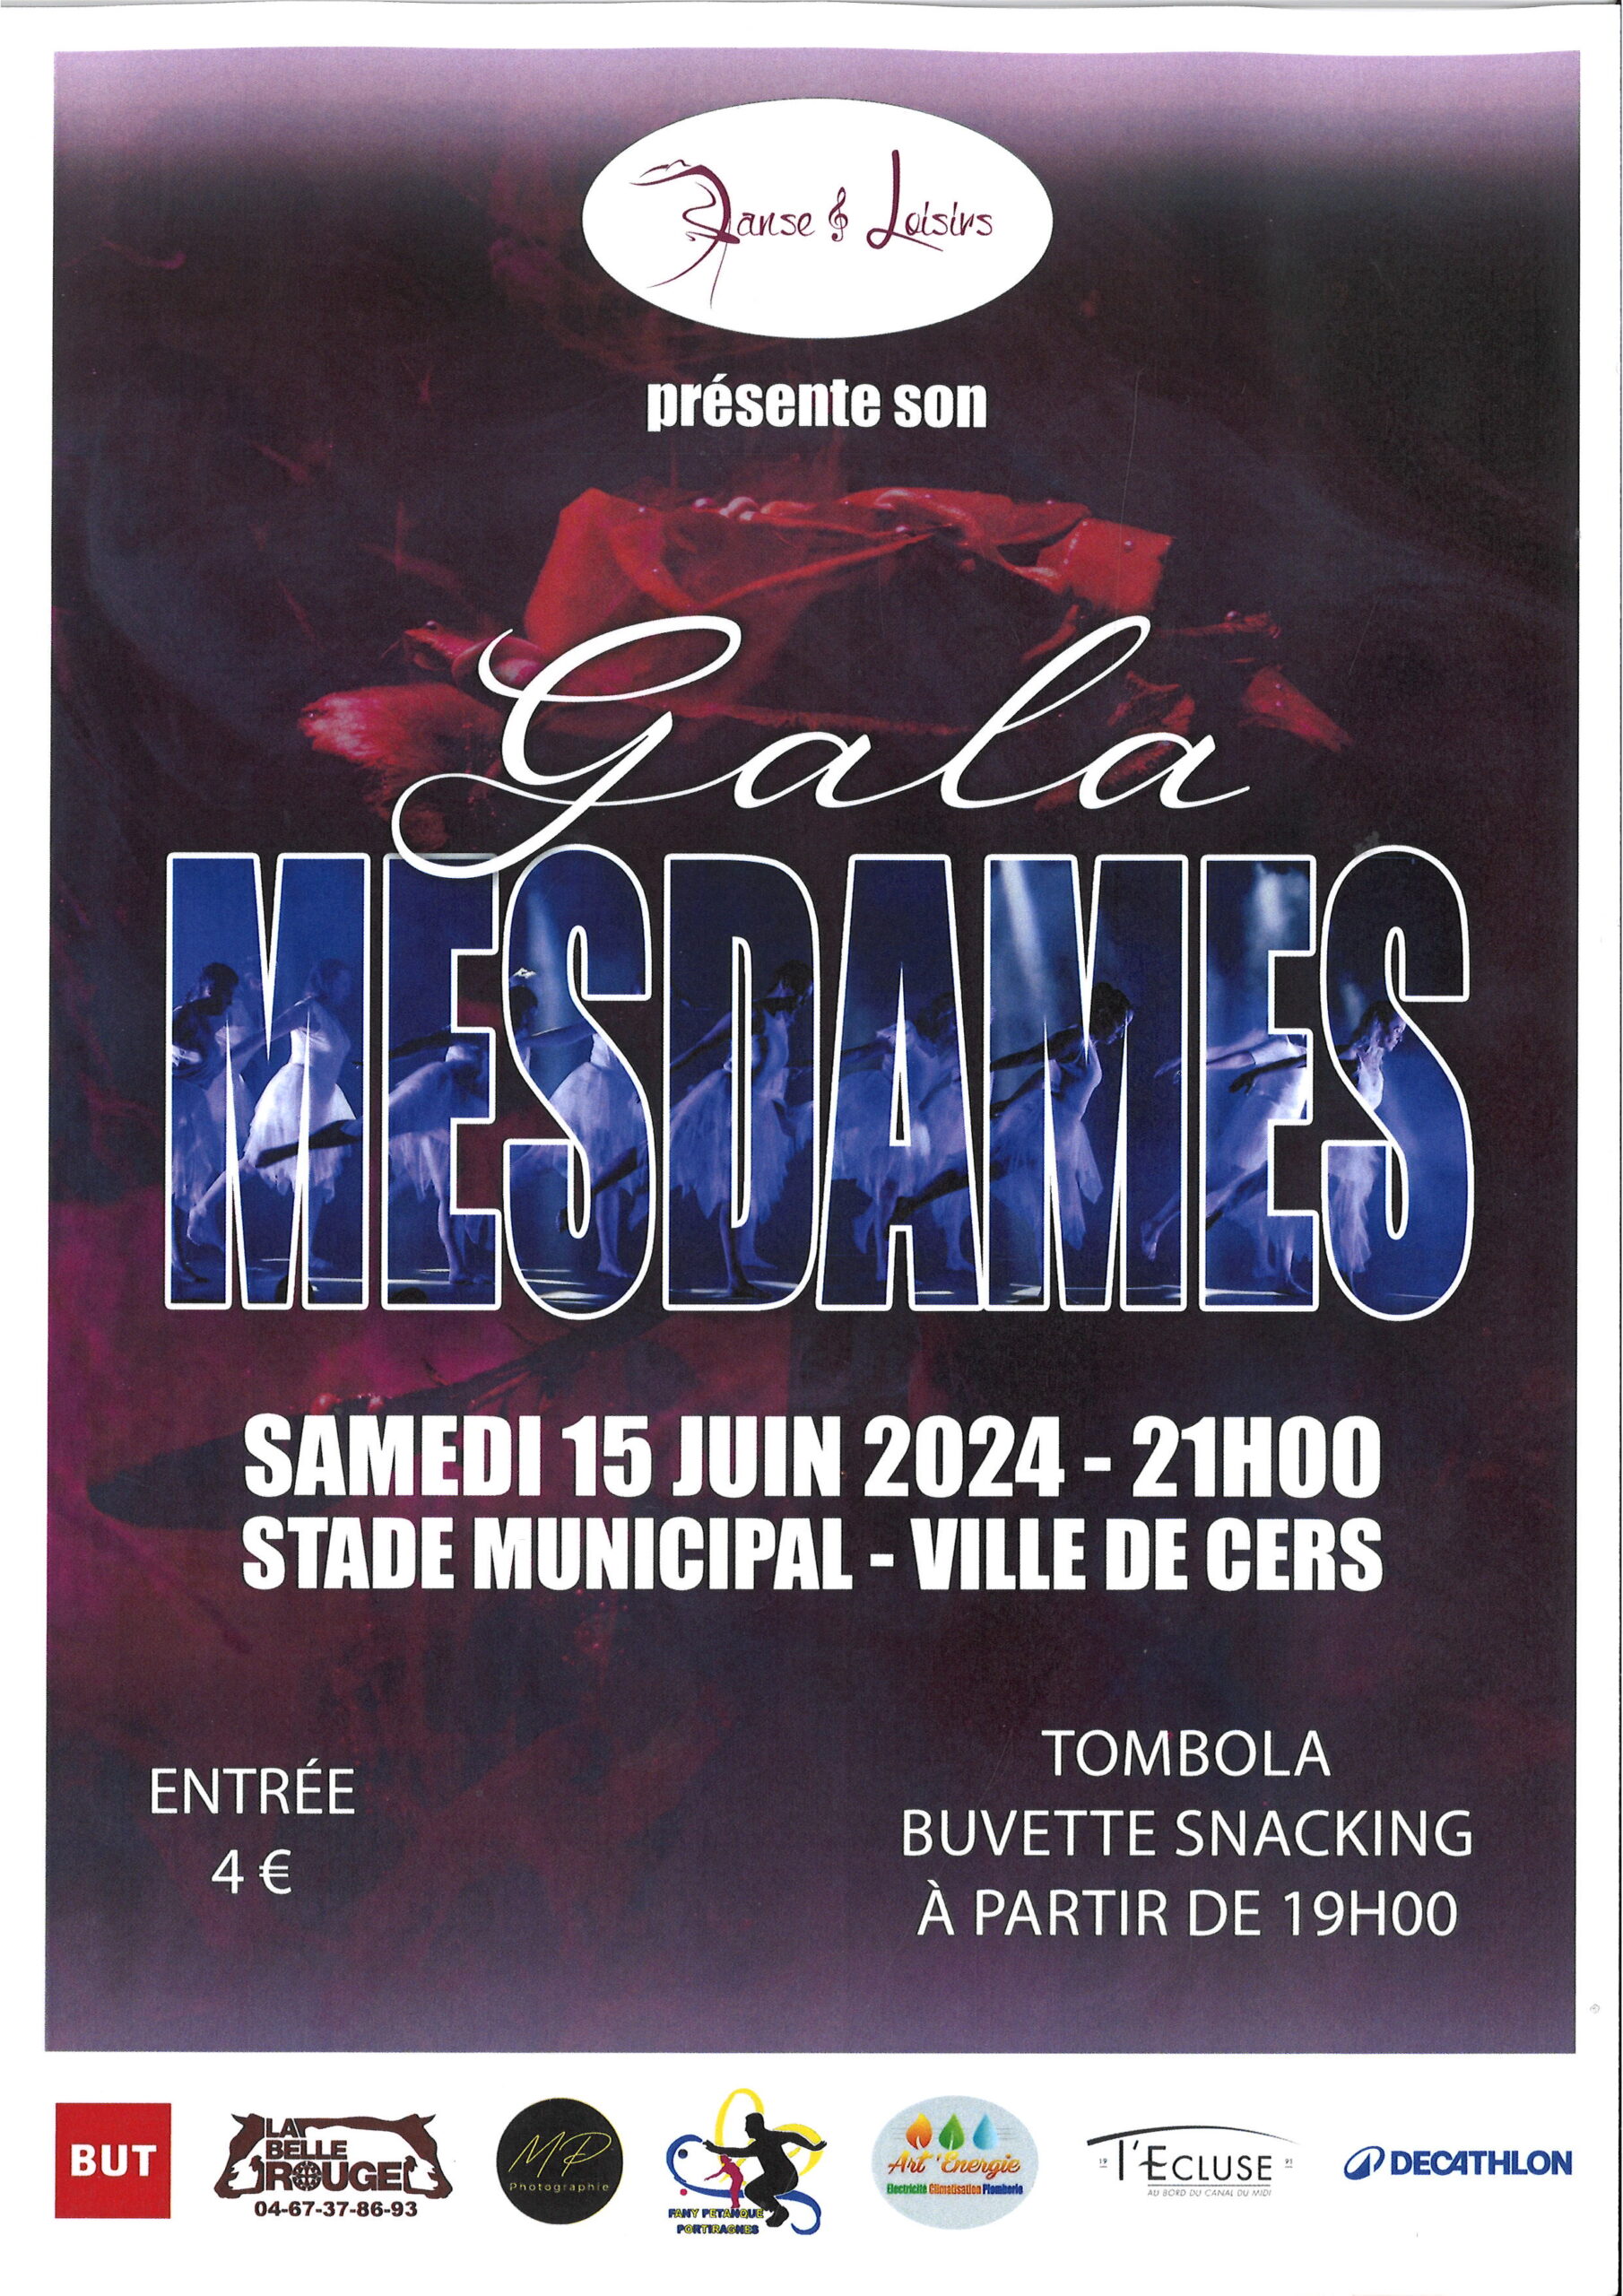 You are currently viewing Gala Danse et Loisirs 15 juin 2024